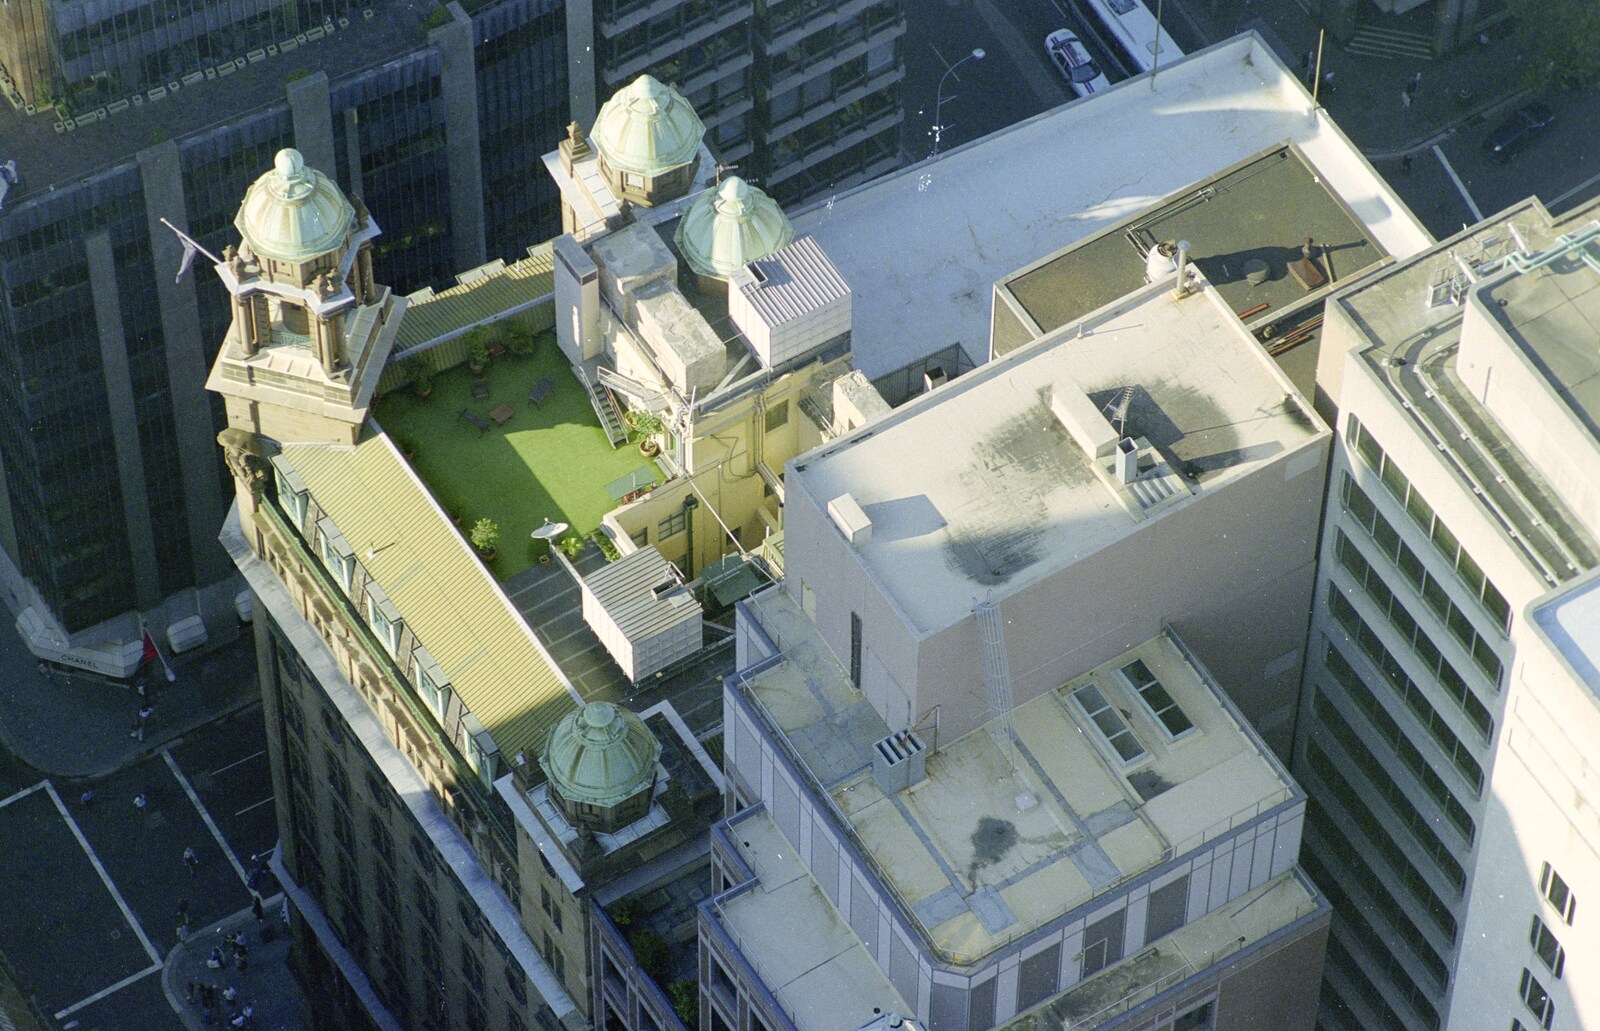 Looking down from the Tower from Sydney Triathlon, Sydney, Australia - 16th April 2000